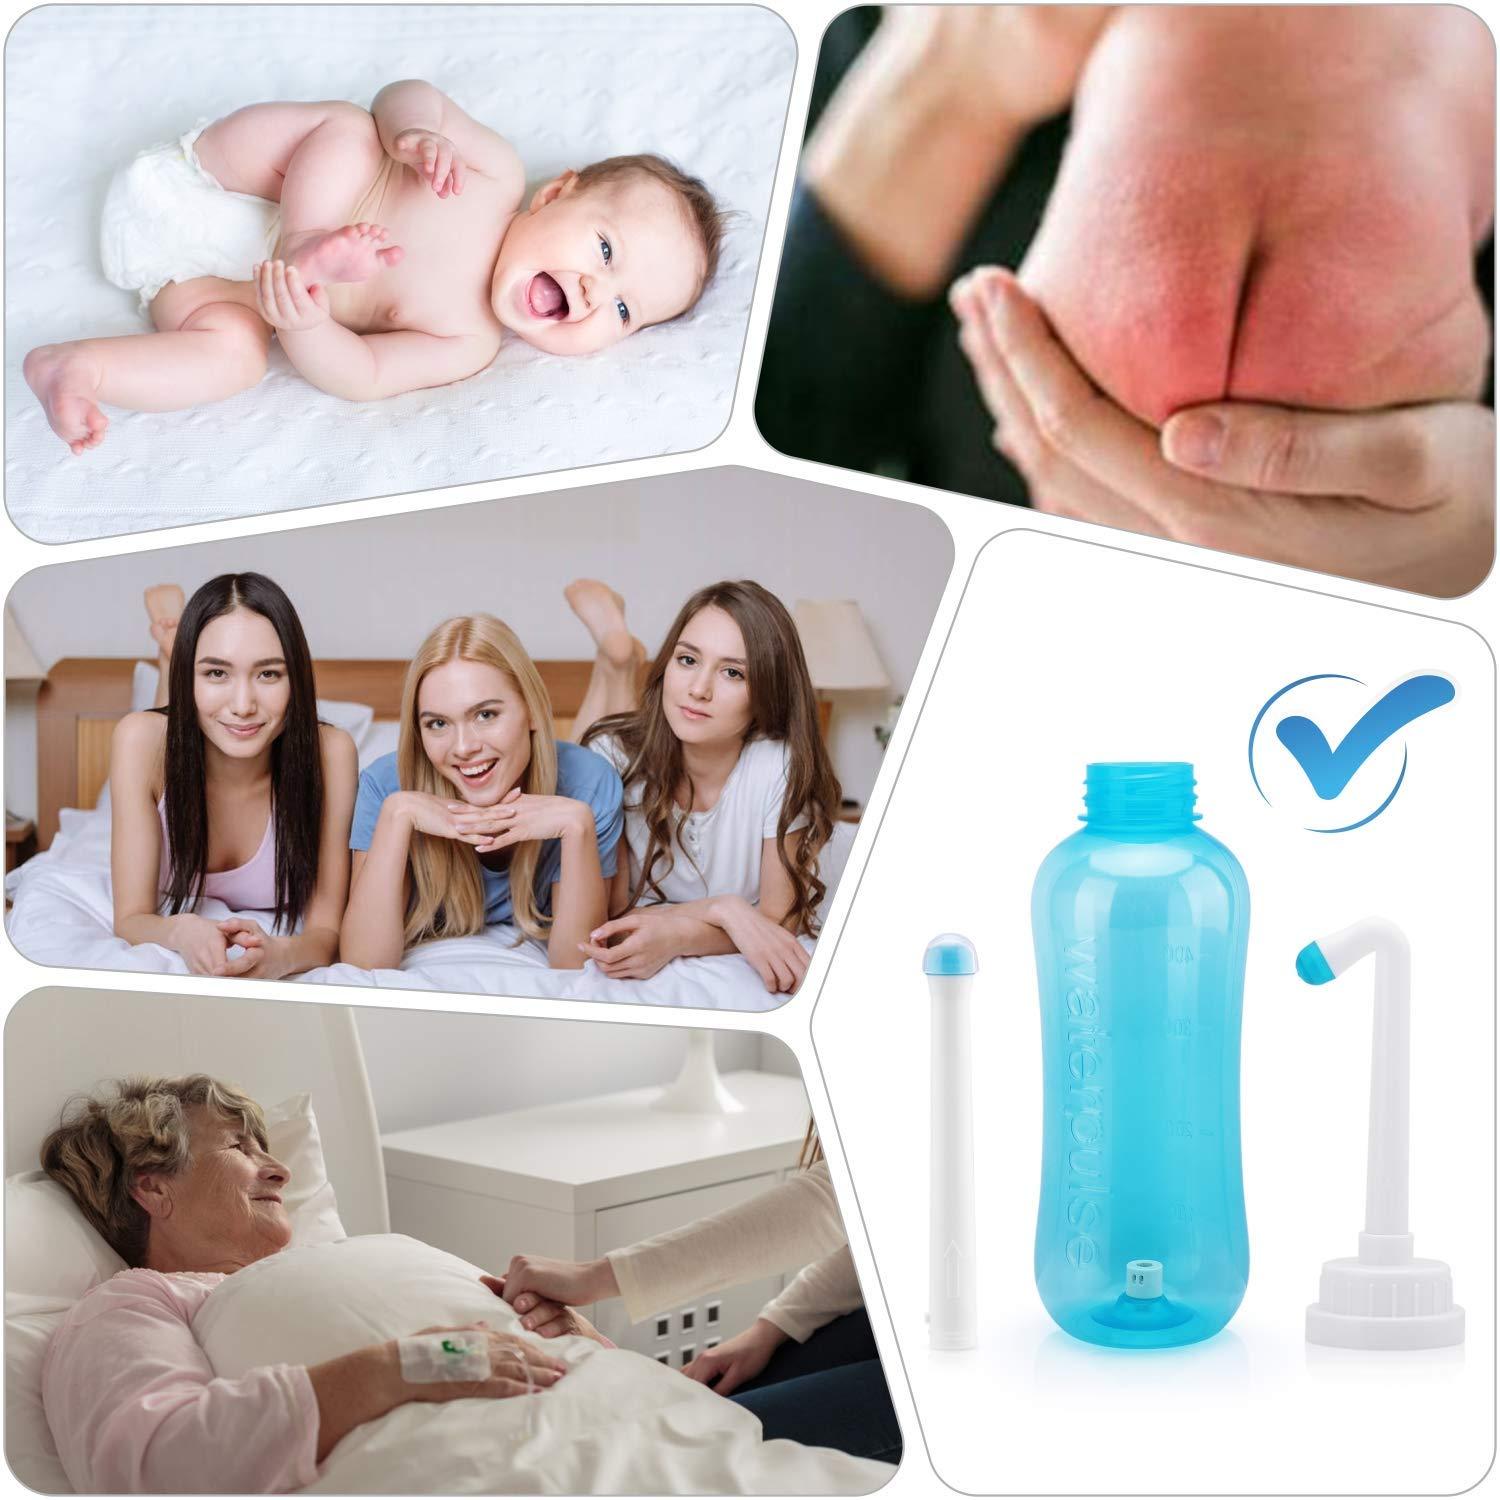 Peri Bottle 500ml for Postpartum Care, Portable Travel Bidet for Baby,  Women or Bedridden Patient with 2 Nozzles for Different Needs